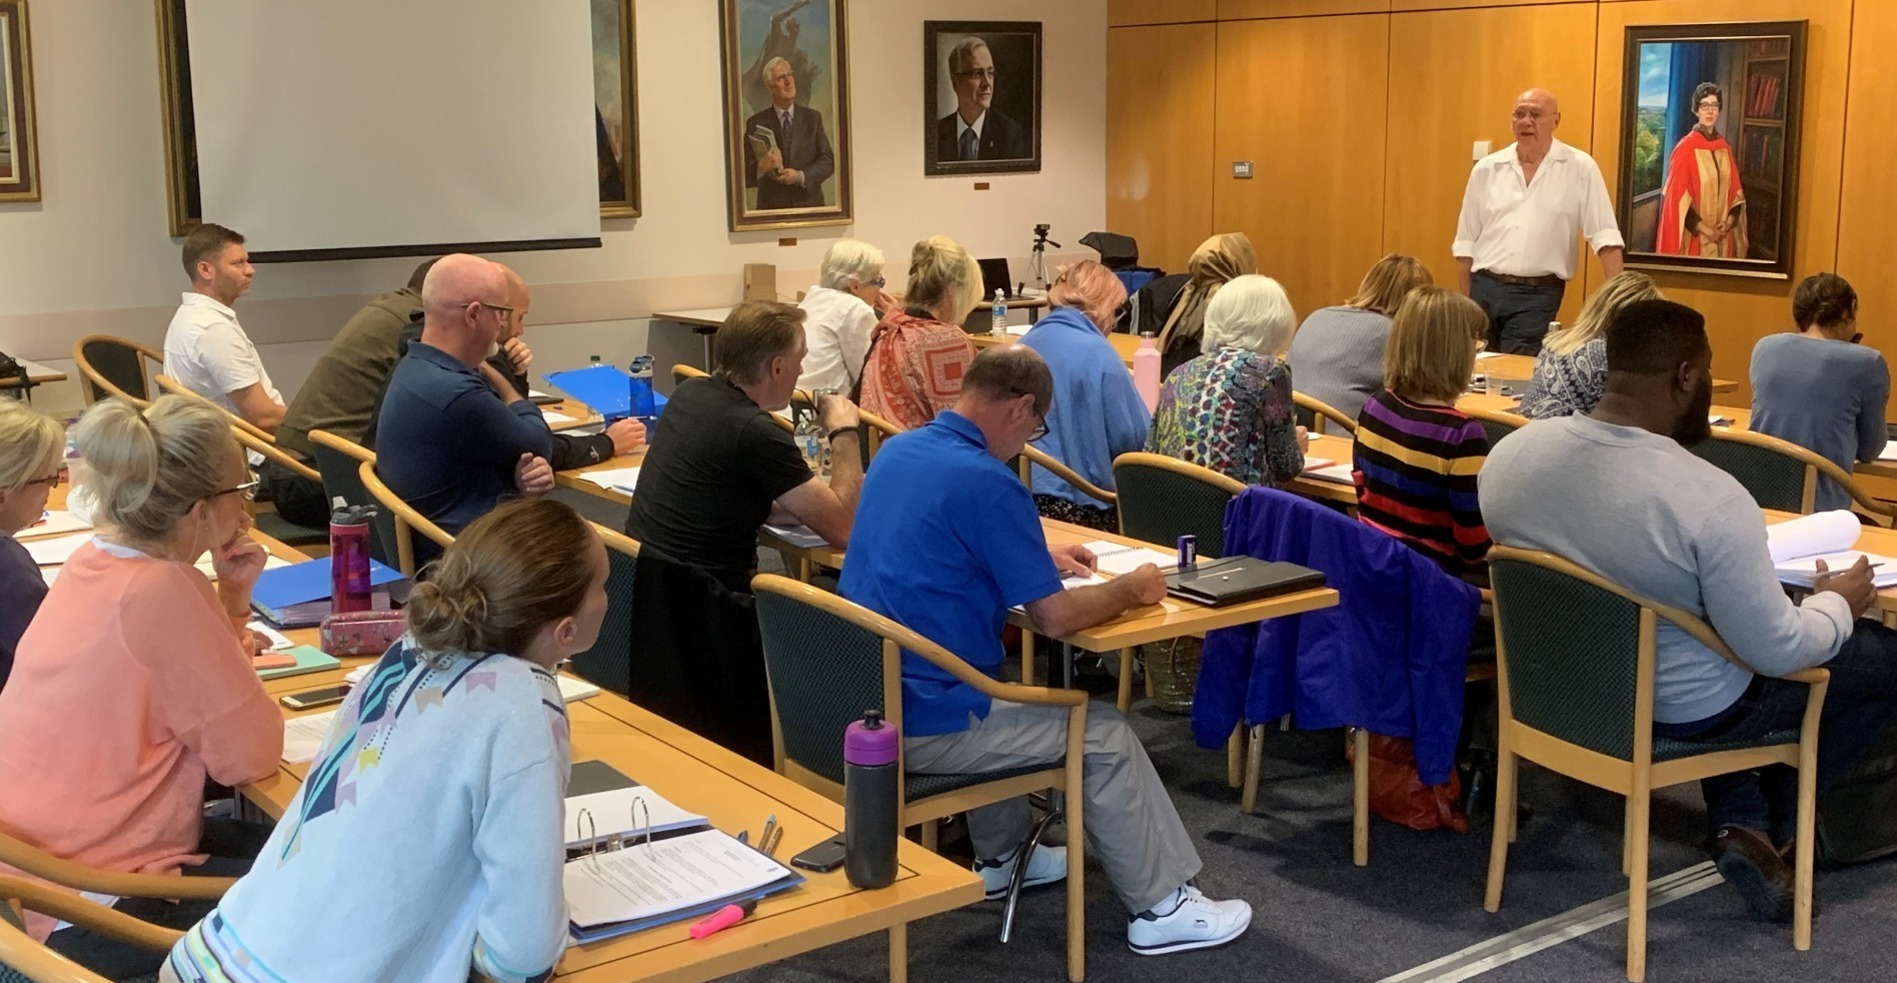 Hypnotherapy training at the university in Guildford